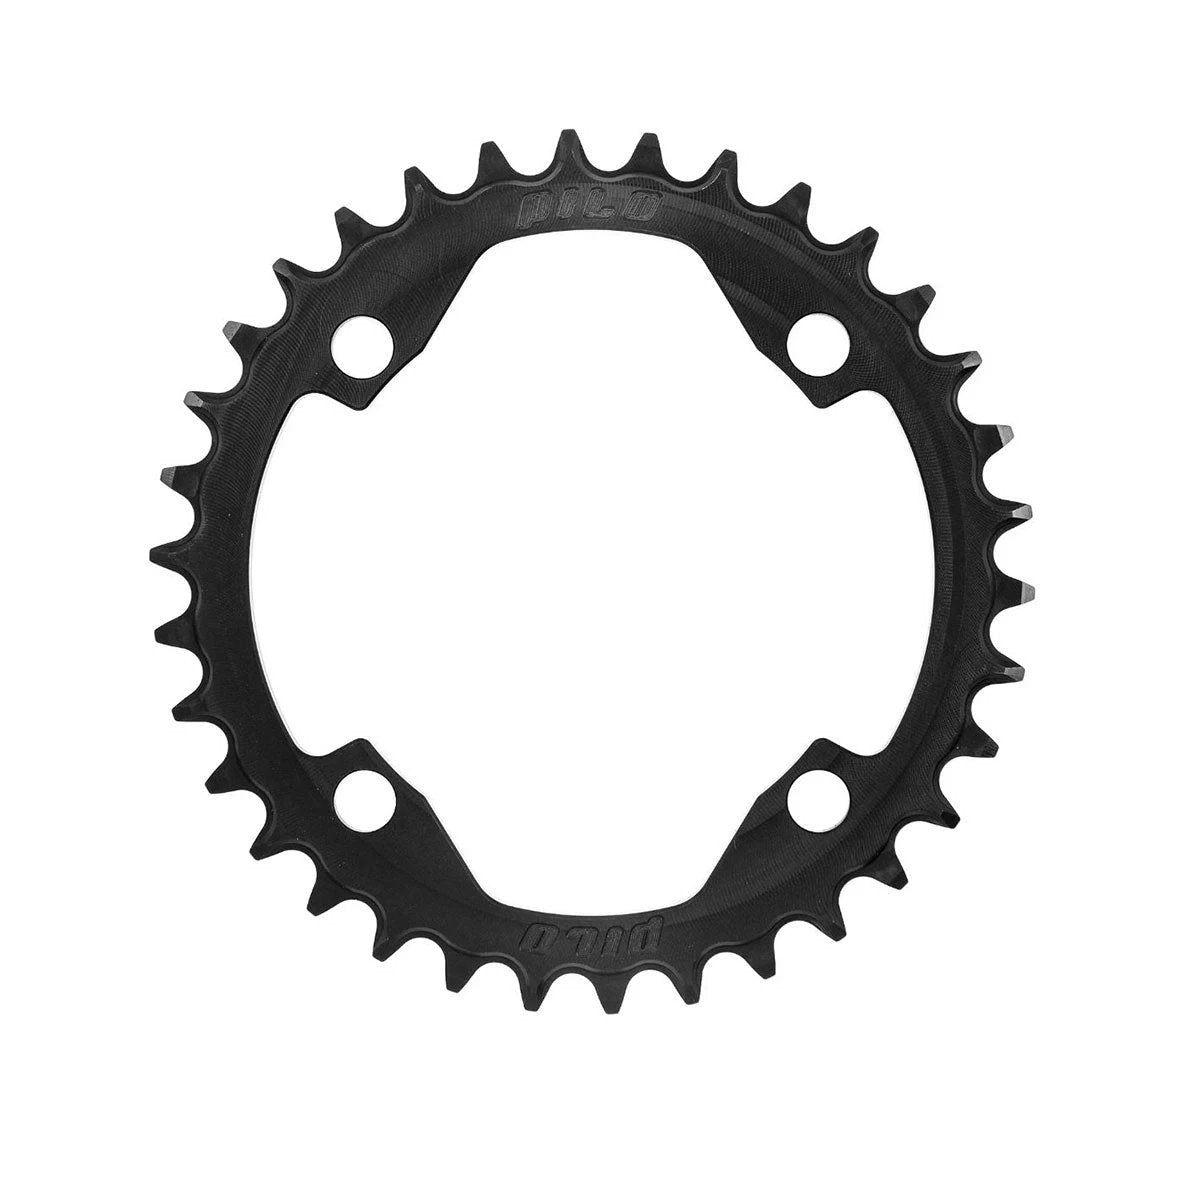 Pilo 34T 104Bcd Narrow Wide Chainring For Cranks